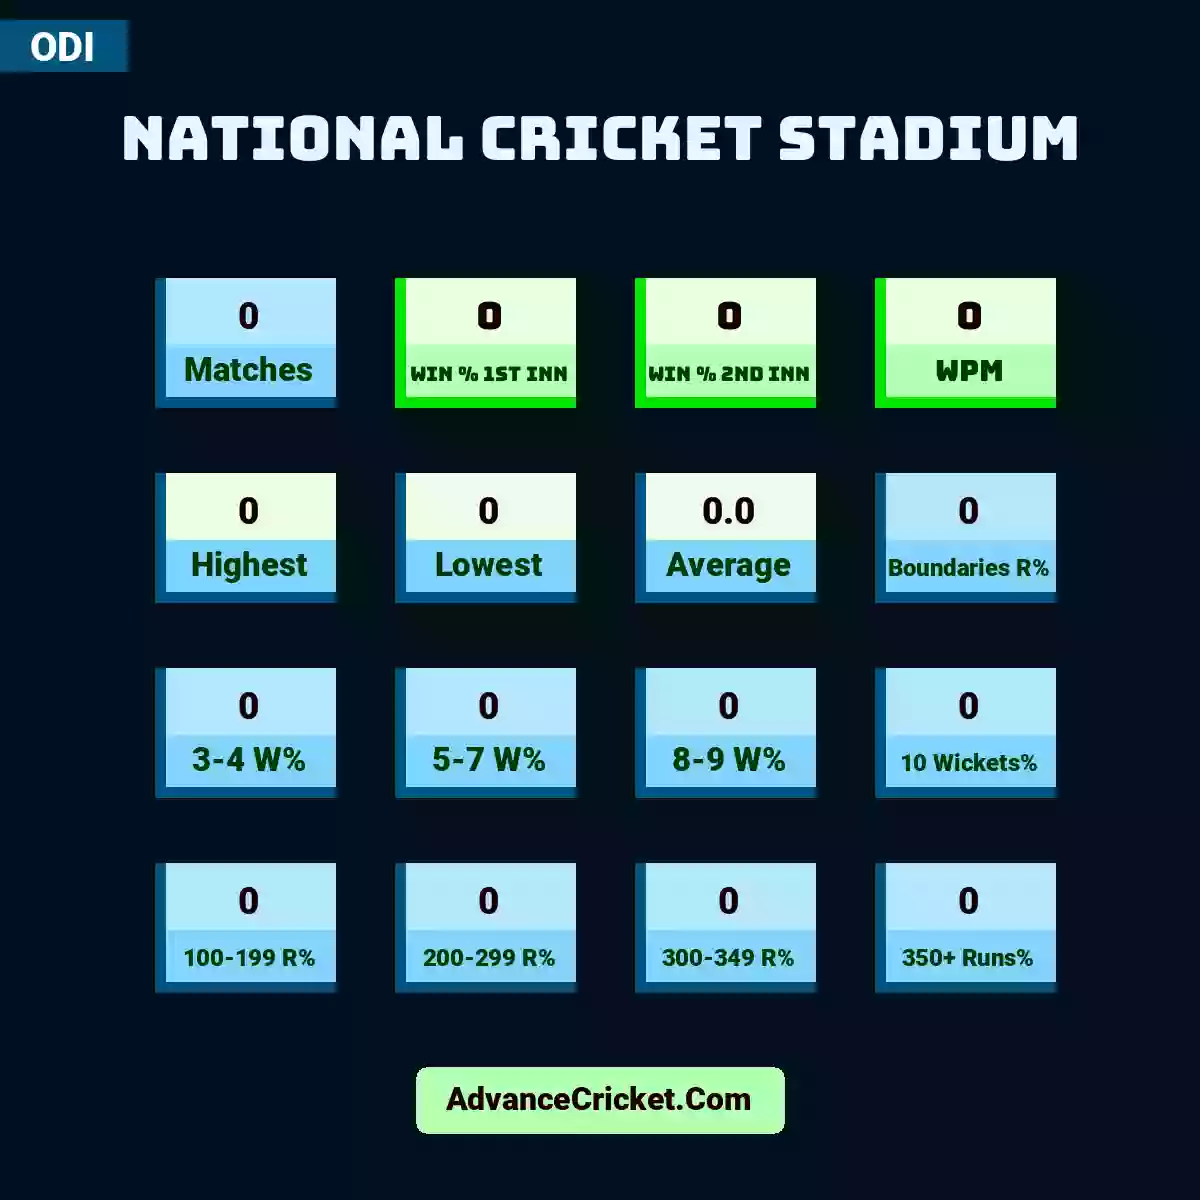 Image showing National Cricket Stadium with Matches: 0, Win % 1st Inn: 0, Win % 2nd Inn: 0, WPM: 0, Highest: 0, Lowest: 0, Average: 0.0, Boundaries R%: 0, 3-4 W%: 0, 5-7 W%: 0, 8-9 W%: 0, 10 Wickets%: 0, 100-199 R%: 0, 200-299 R%: 0, 300-349 R%: 0, 350+ Runs%: 0.